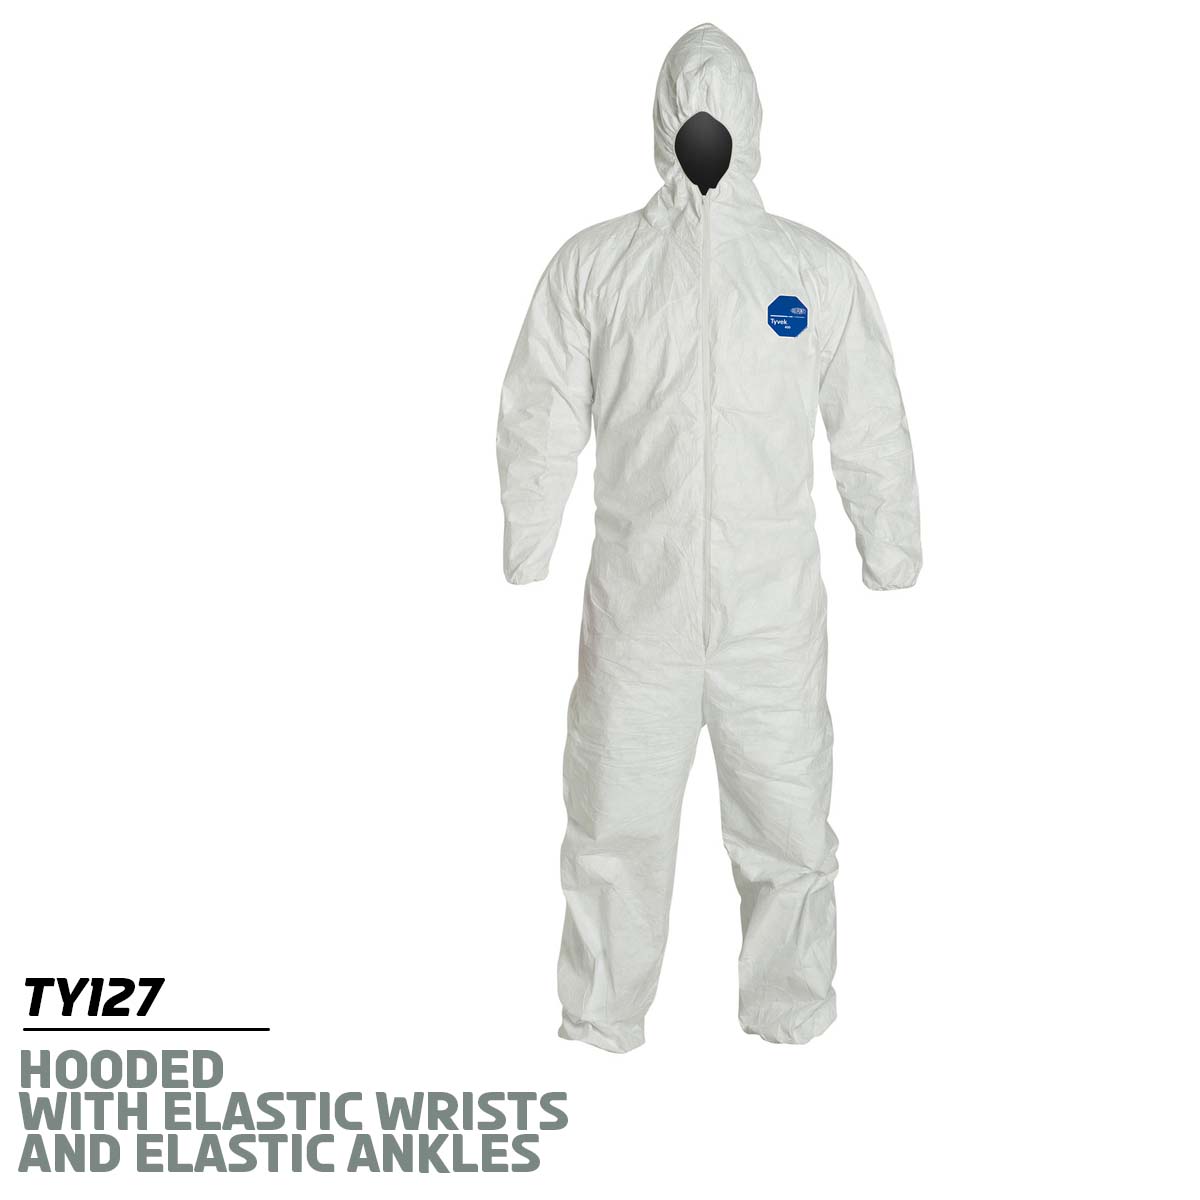 Attached Hood • NO Boots / Elastic Wrists / Ankles / Medium DuPont™ White Tyvek® 400 Disposable Coveralls Work Safety Protective Gear